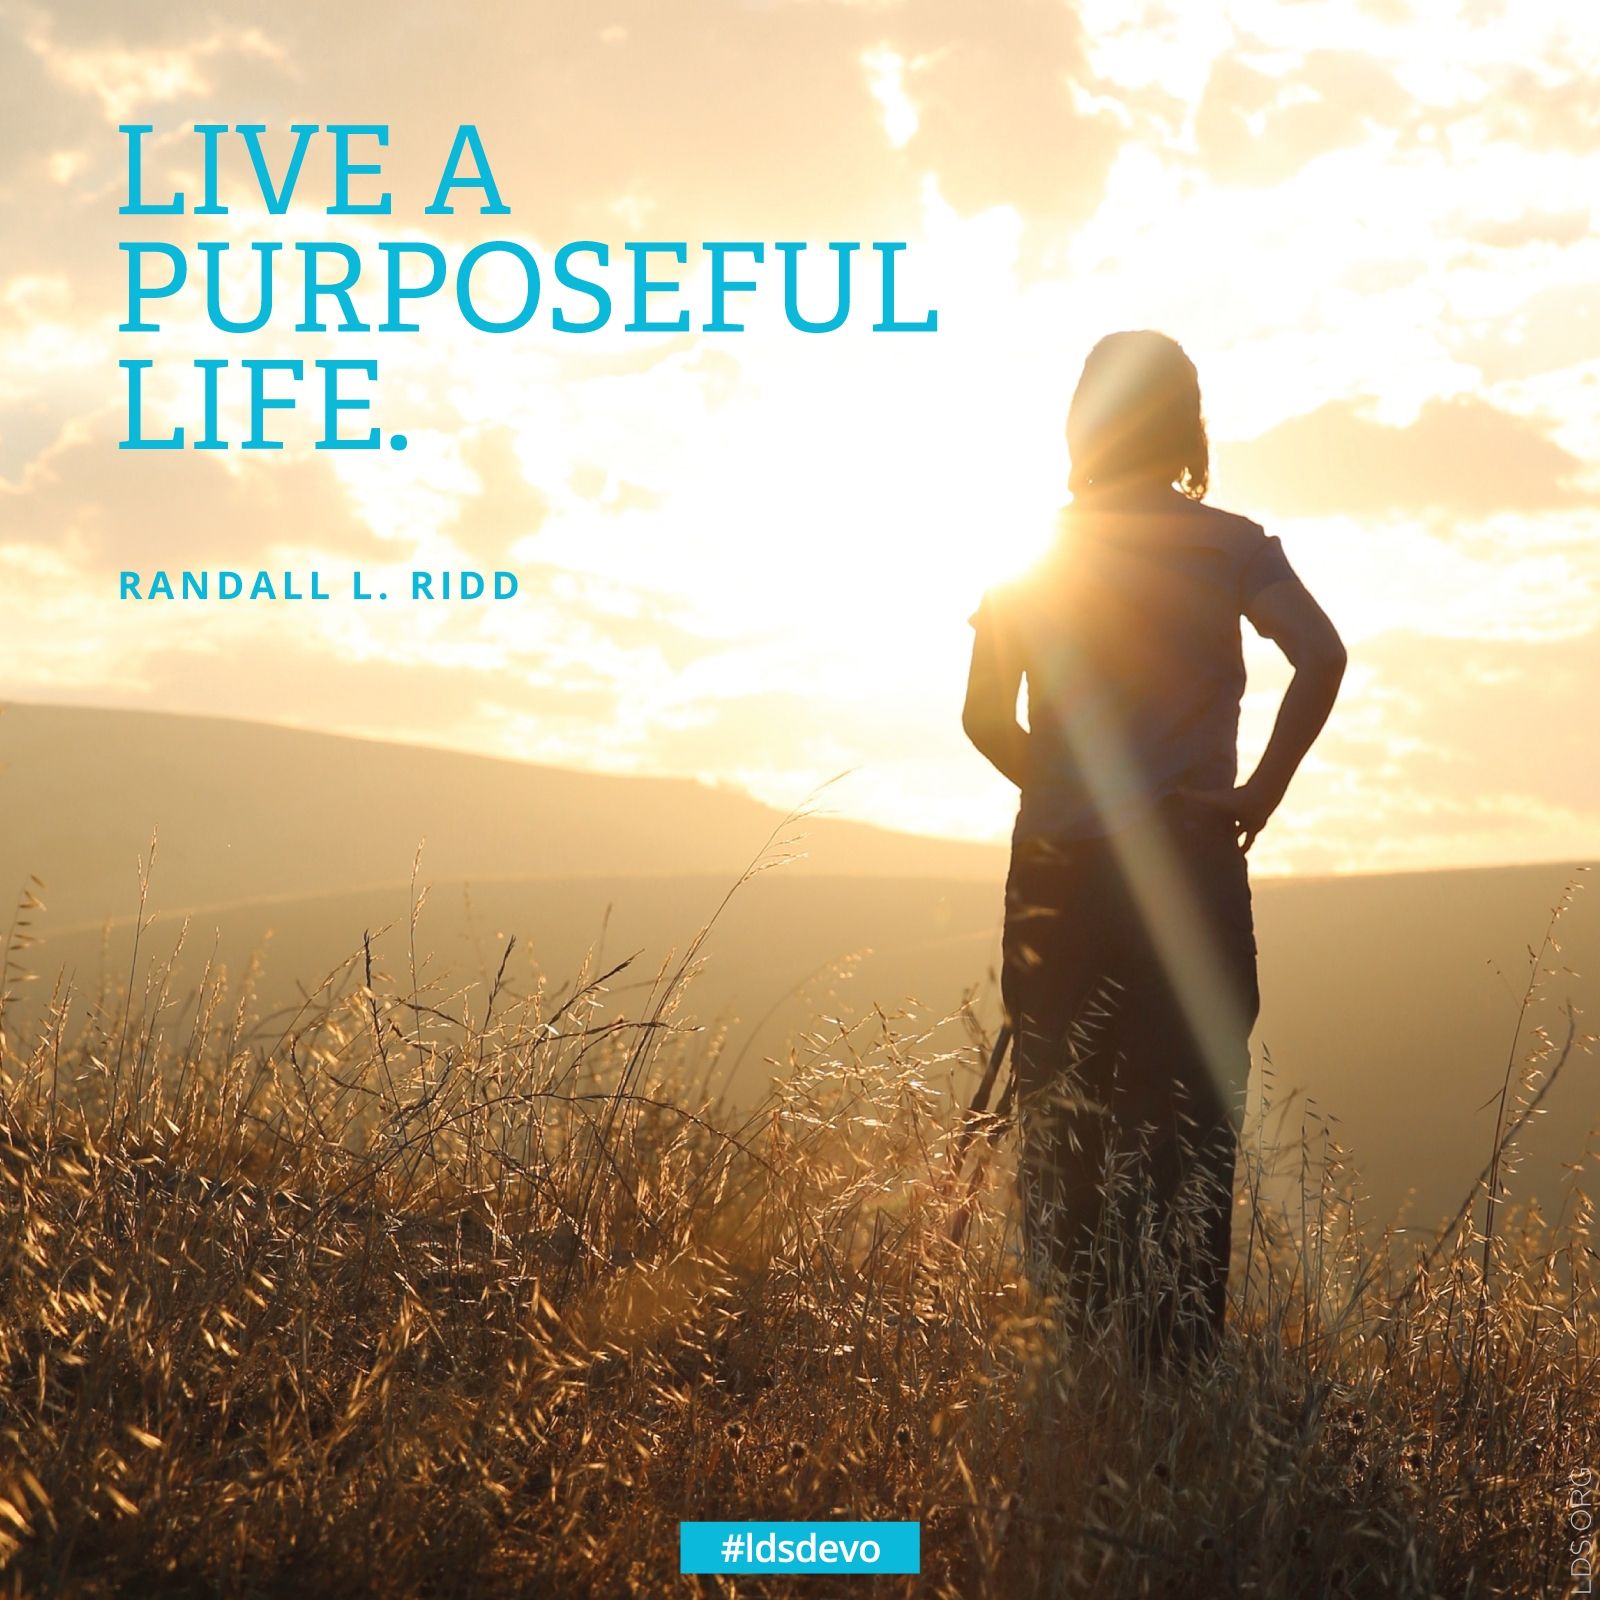 “Live a purposeful life.” —Randall L. Ridd, “Living with Purpose: The Importance of ‘Real Intent’” © undefined ipCode 1.